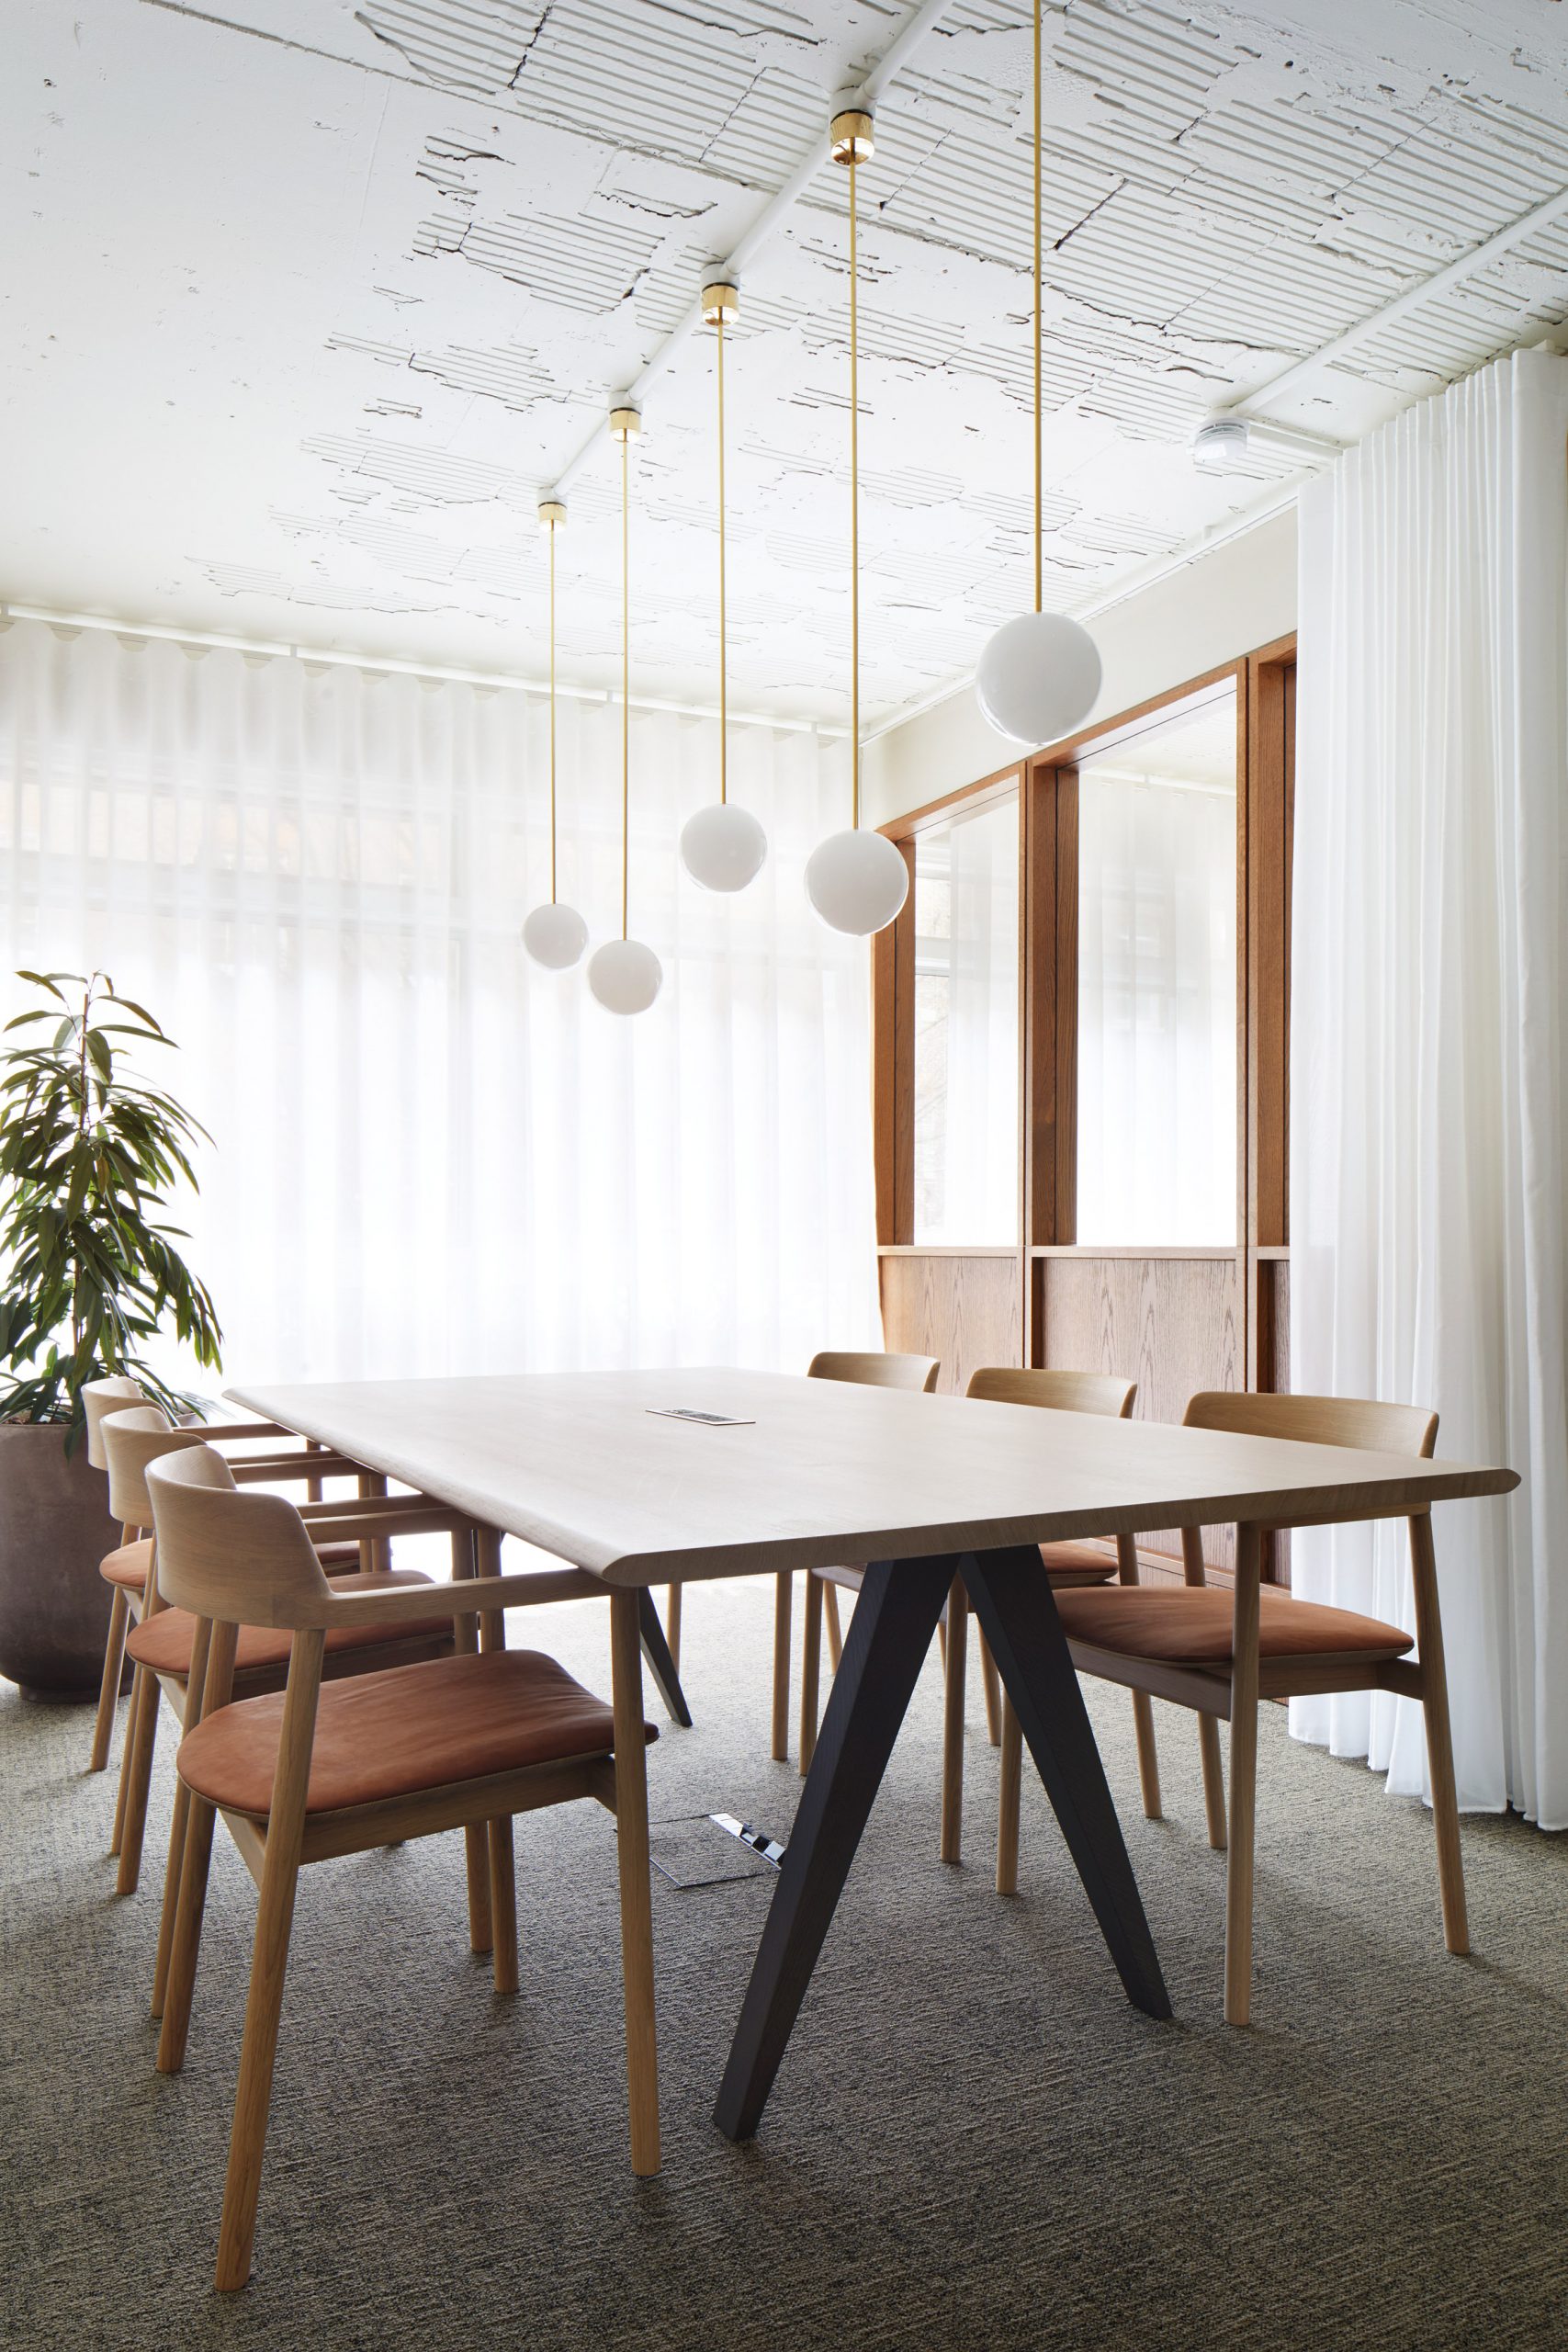 Wood-panelled meeting room with spherical pendant lights and wooden furniture in Fitzroy Street office interior